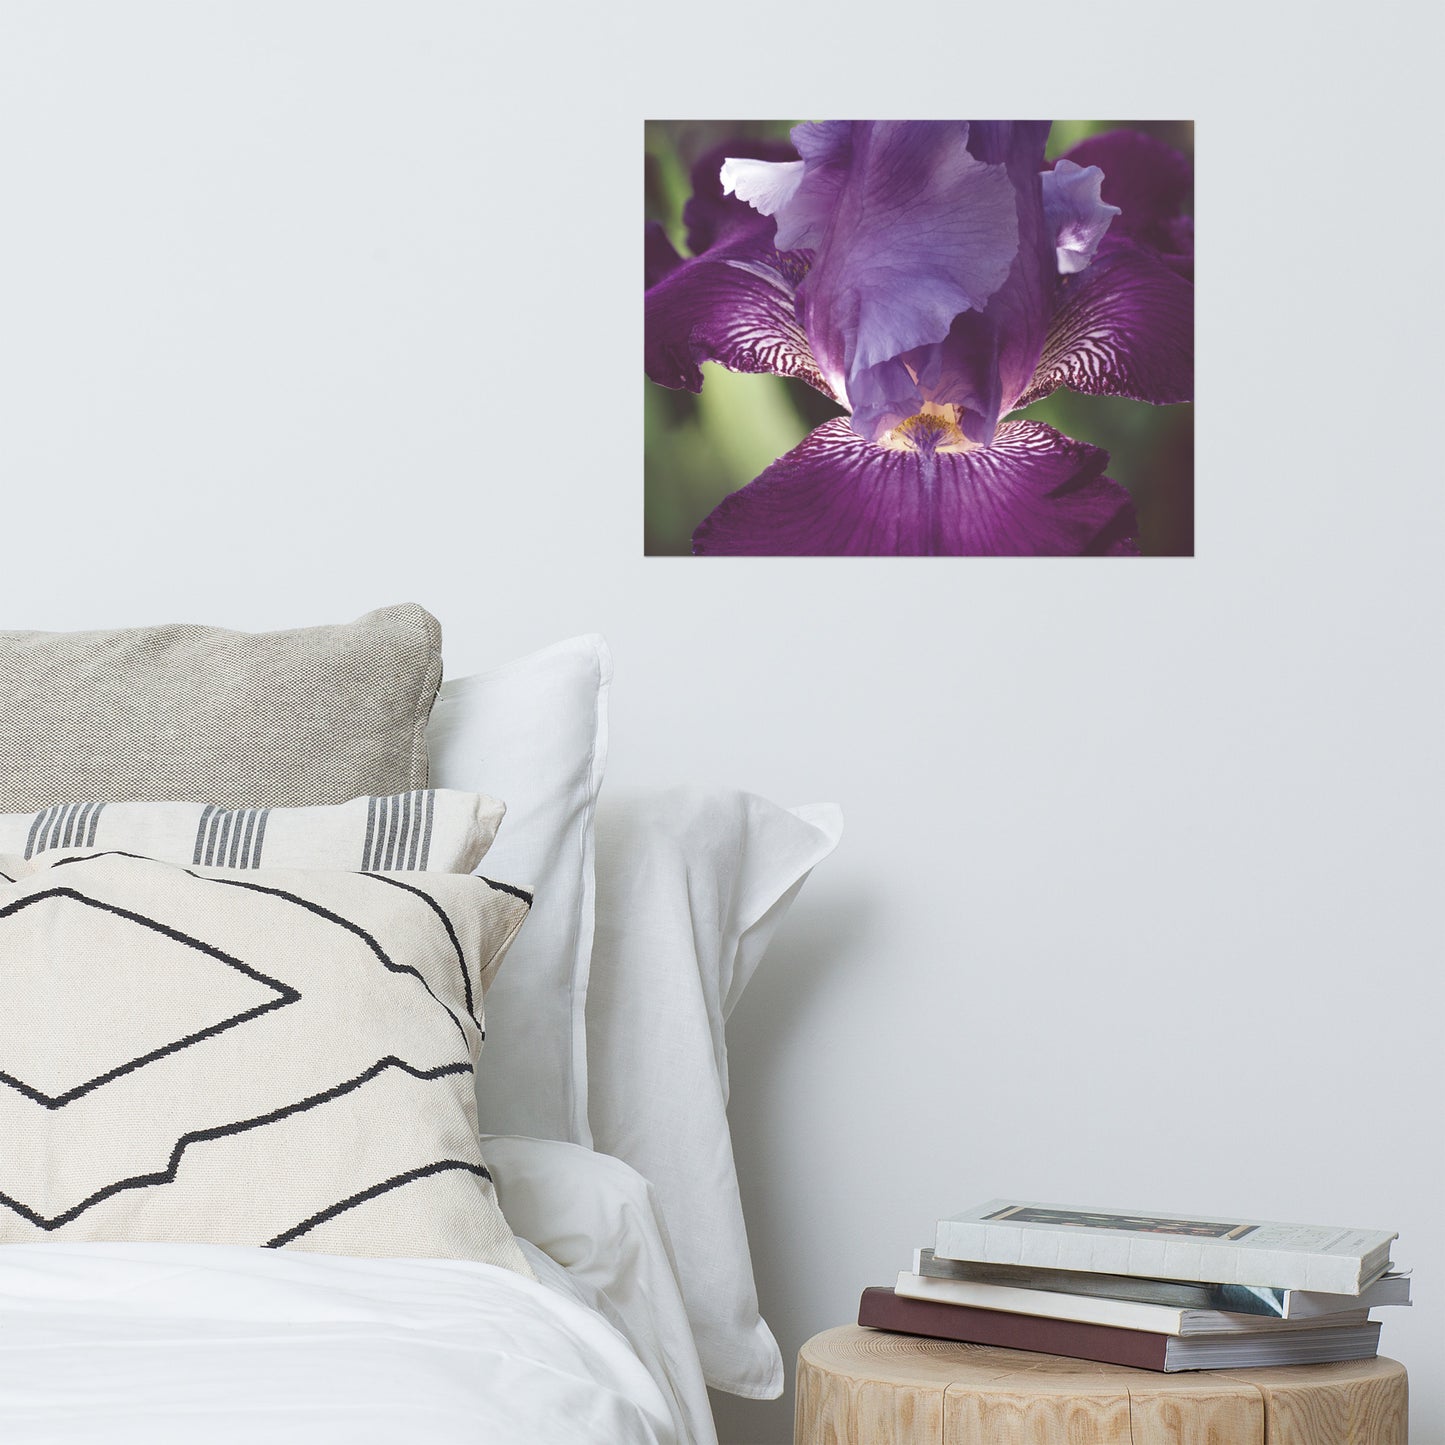 Glowing Iris Moody Midnight Floral Nature Photo Loose Unframed Wall Art Prints